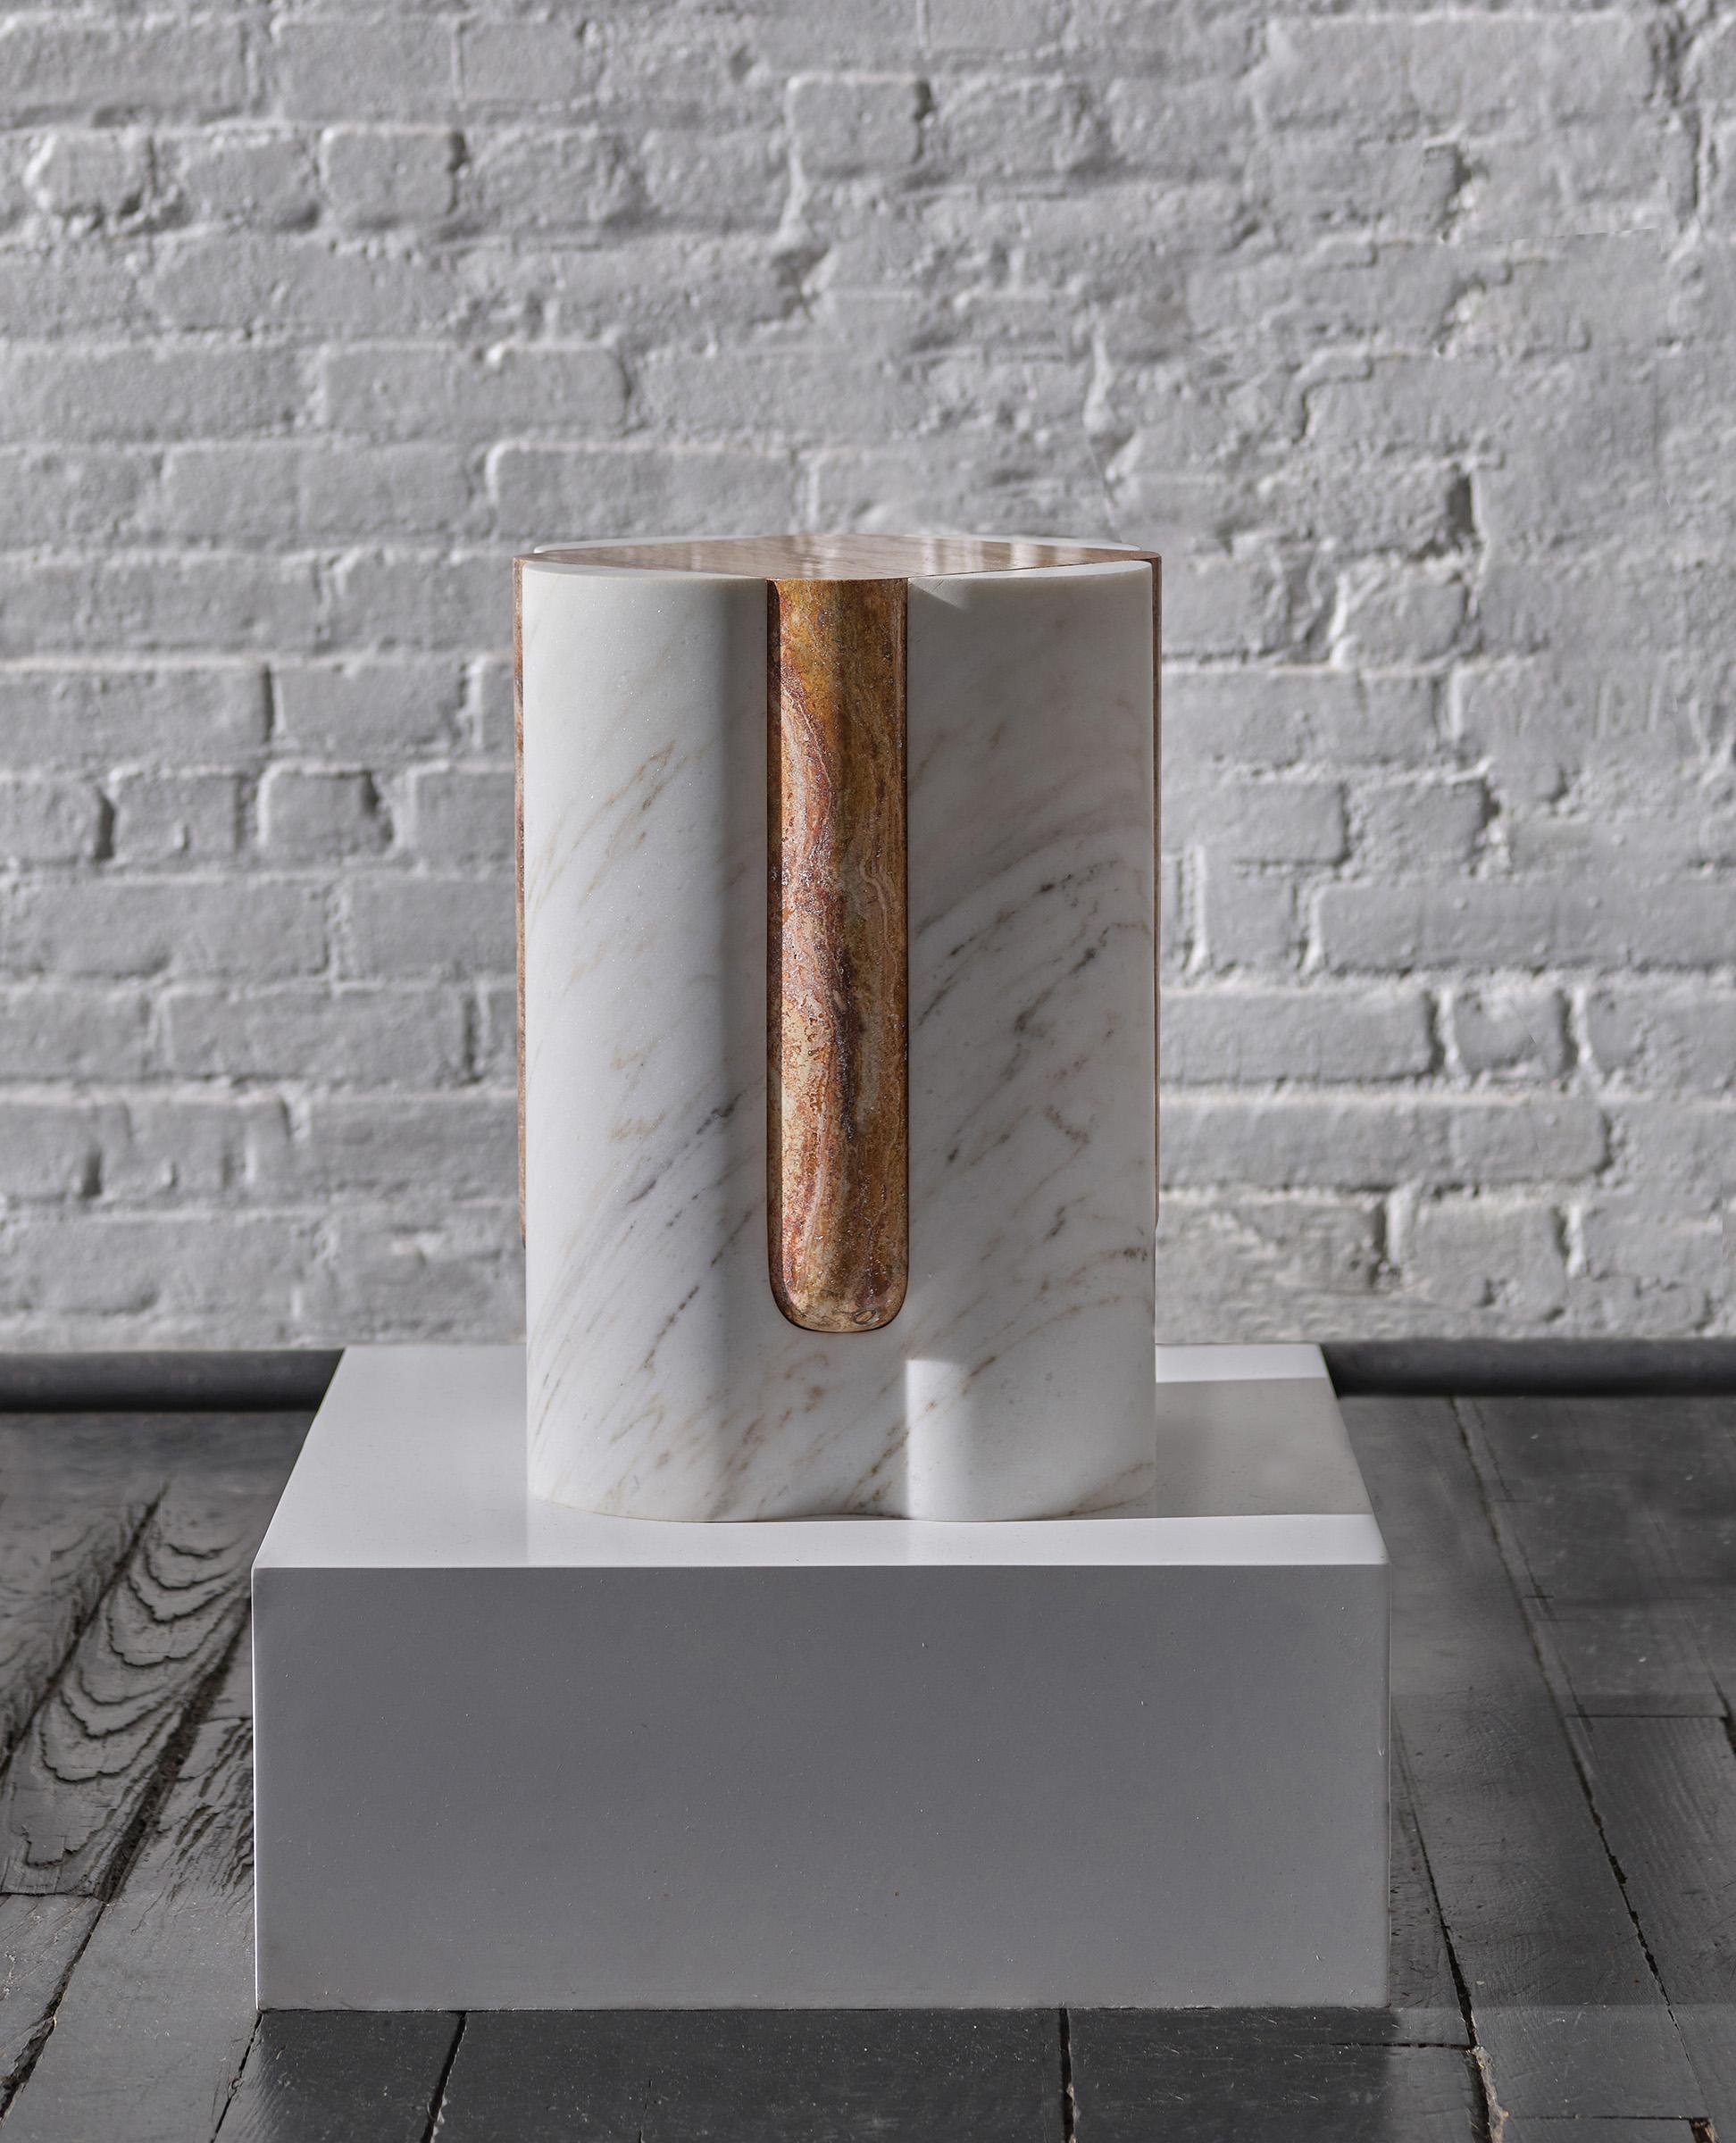 Organic Modern Volcanic Shade of Marble II Stool/Table by Sten Studio, REP by Tuleste Factory